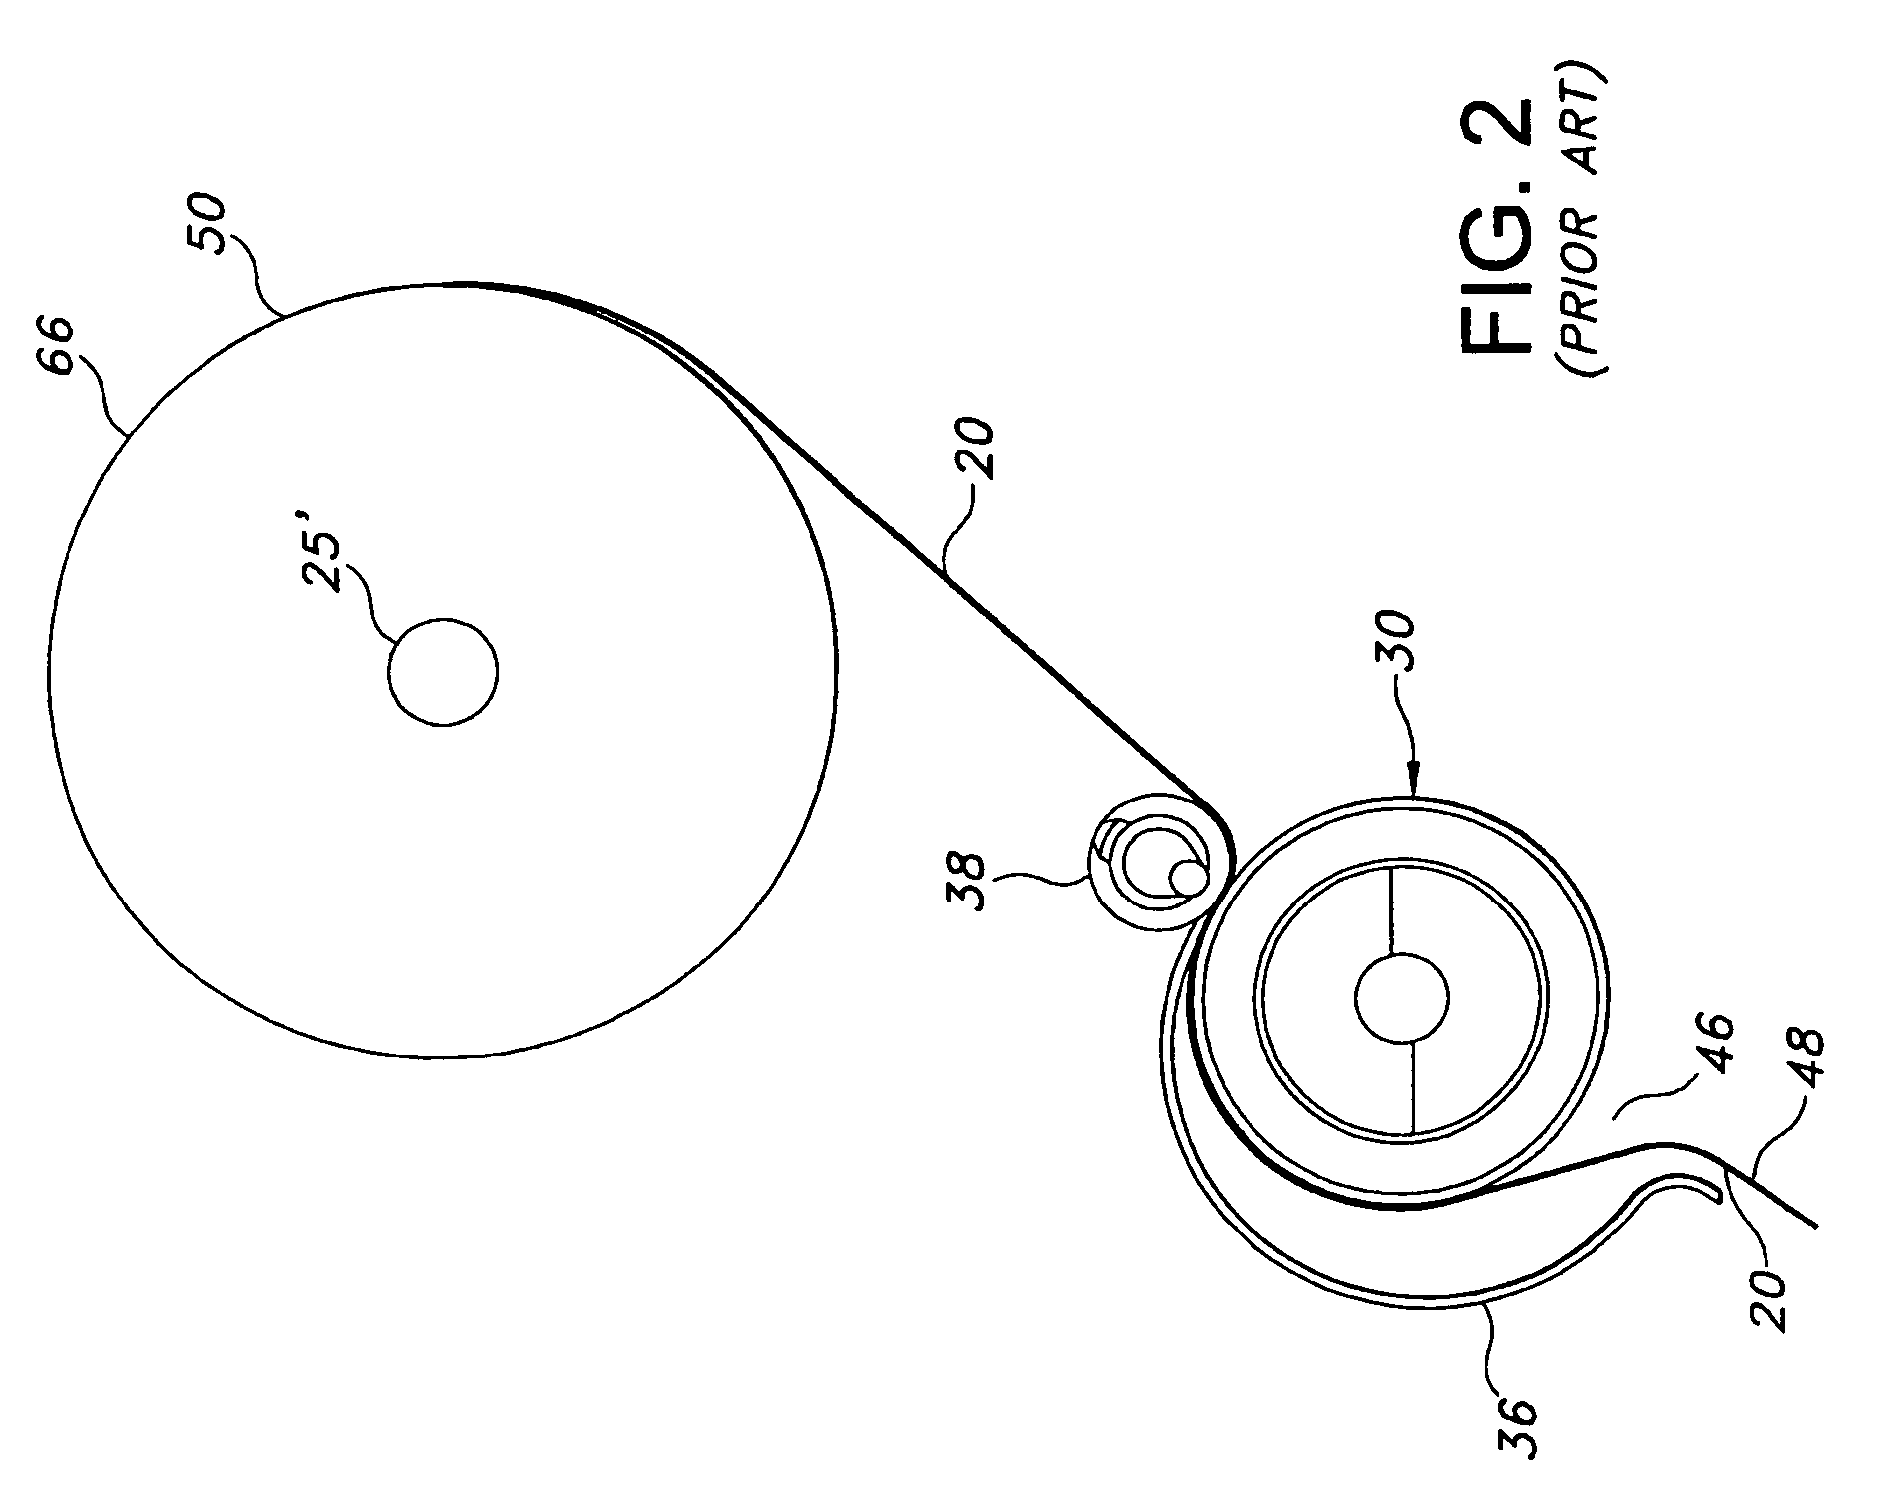 Guide roller with flanges for a dispenser